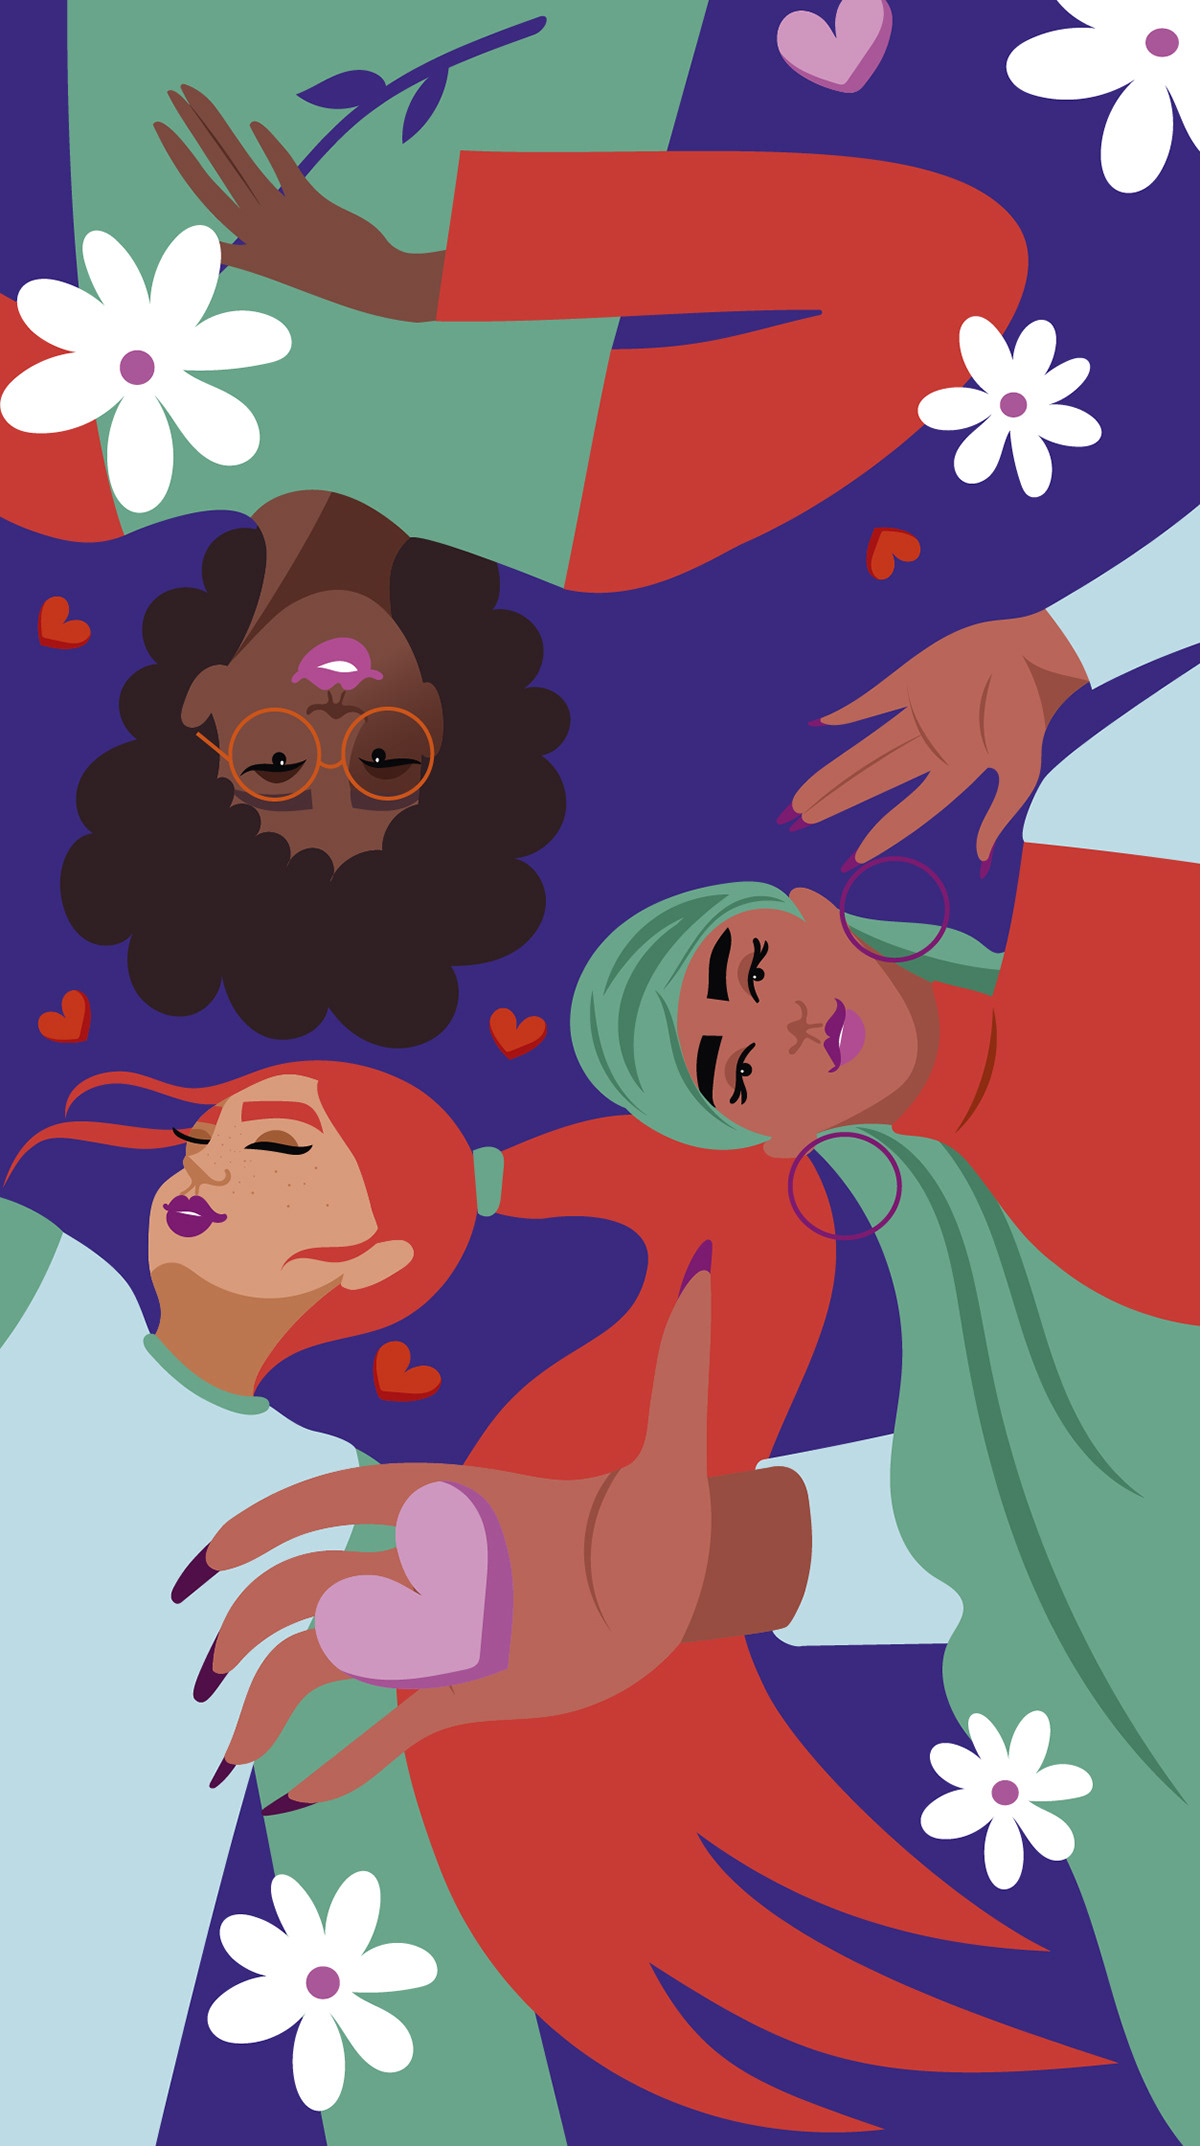 3 women created in vectors. Colorful flat design